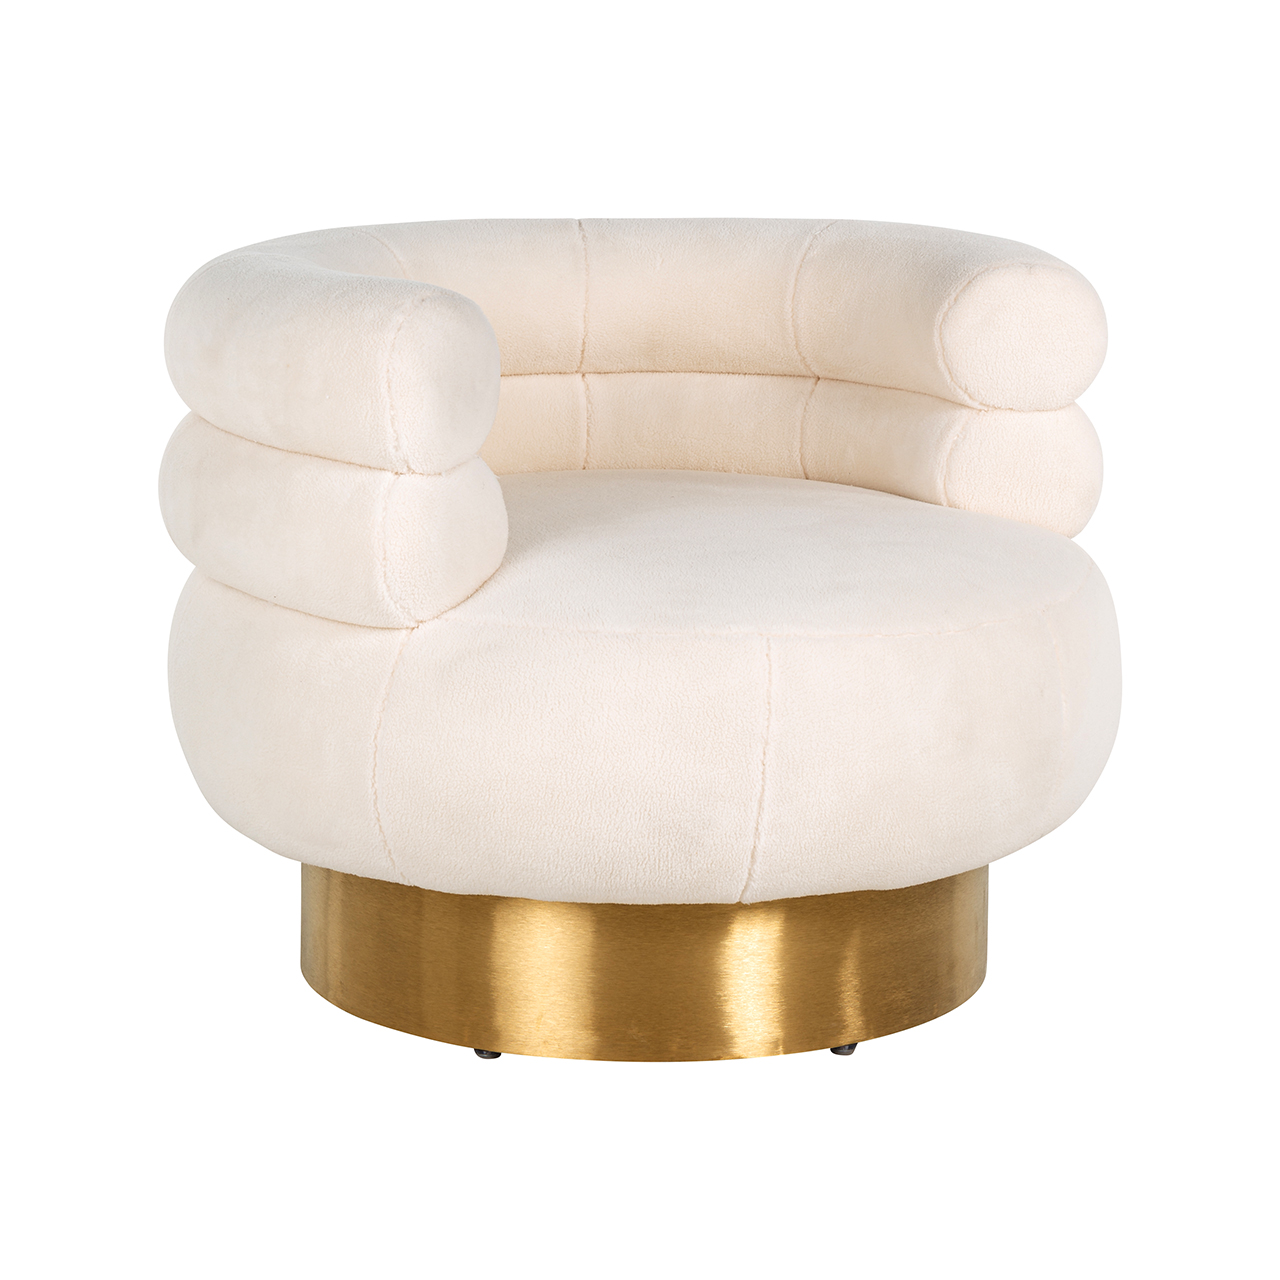 Drehsessel Teddy Fayah White teddy / Brushed gold